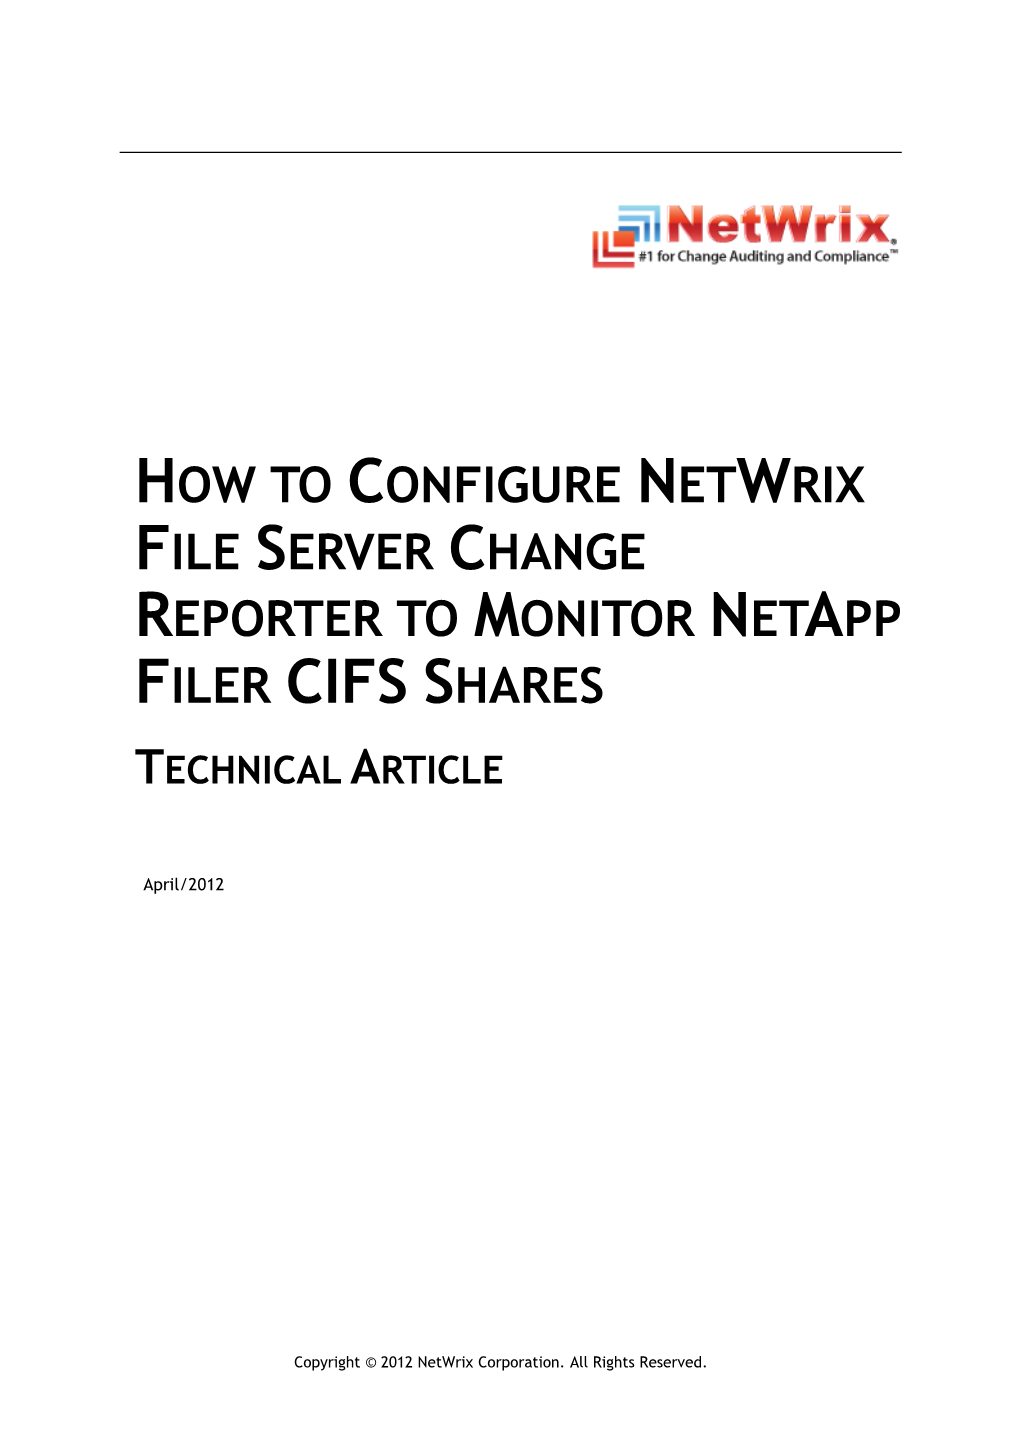 How to Configure Netwrix File Server Change Reporter to Monitor Netapp Filer Cifs Shares Technical Article